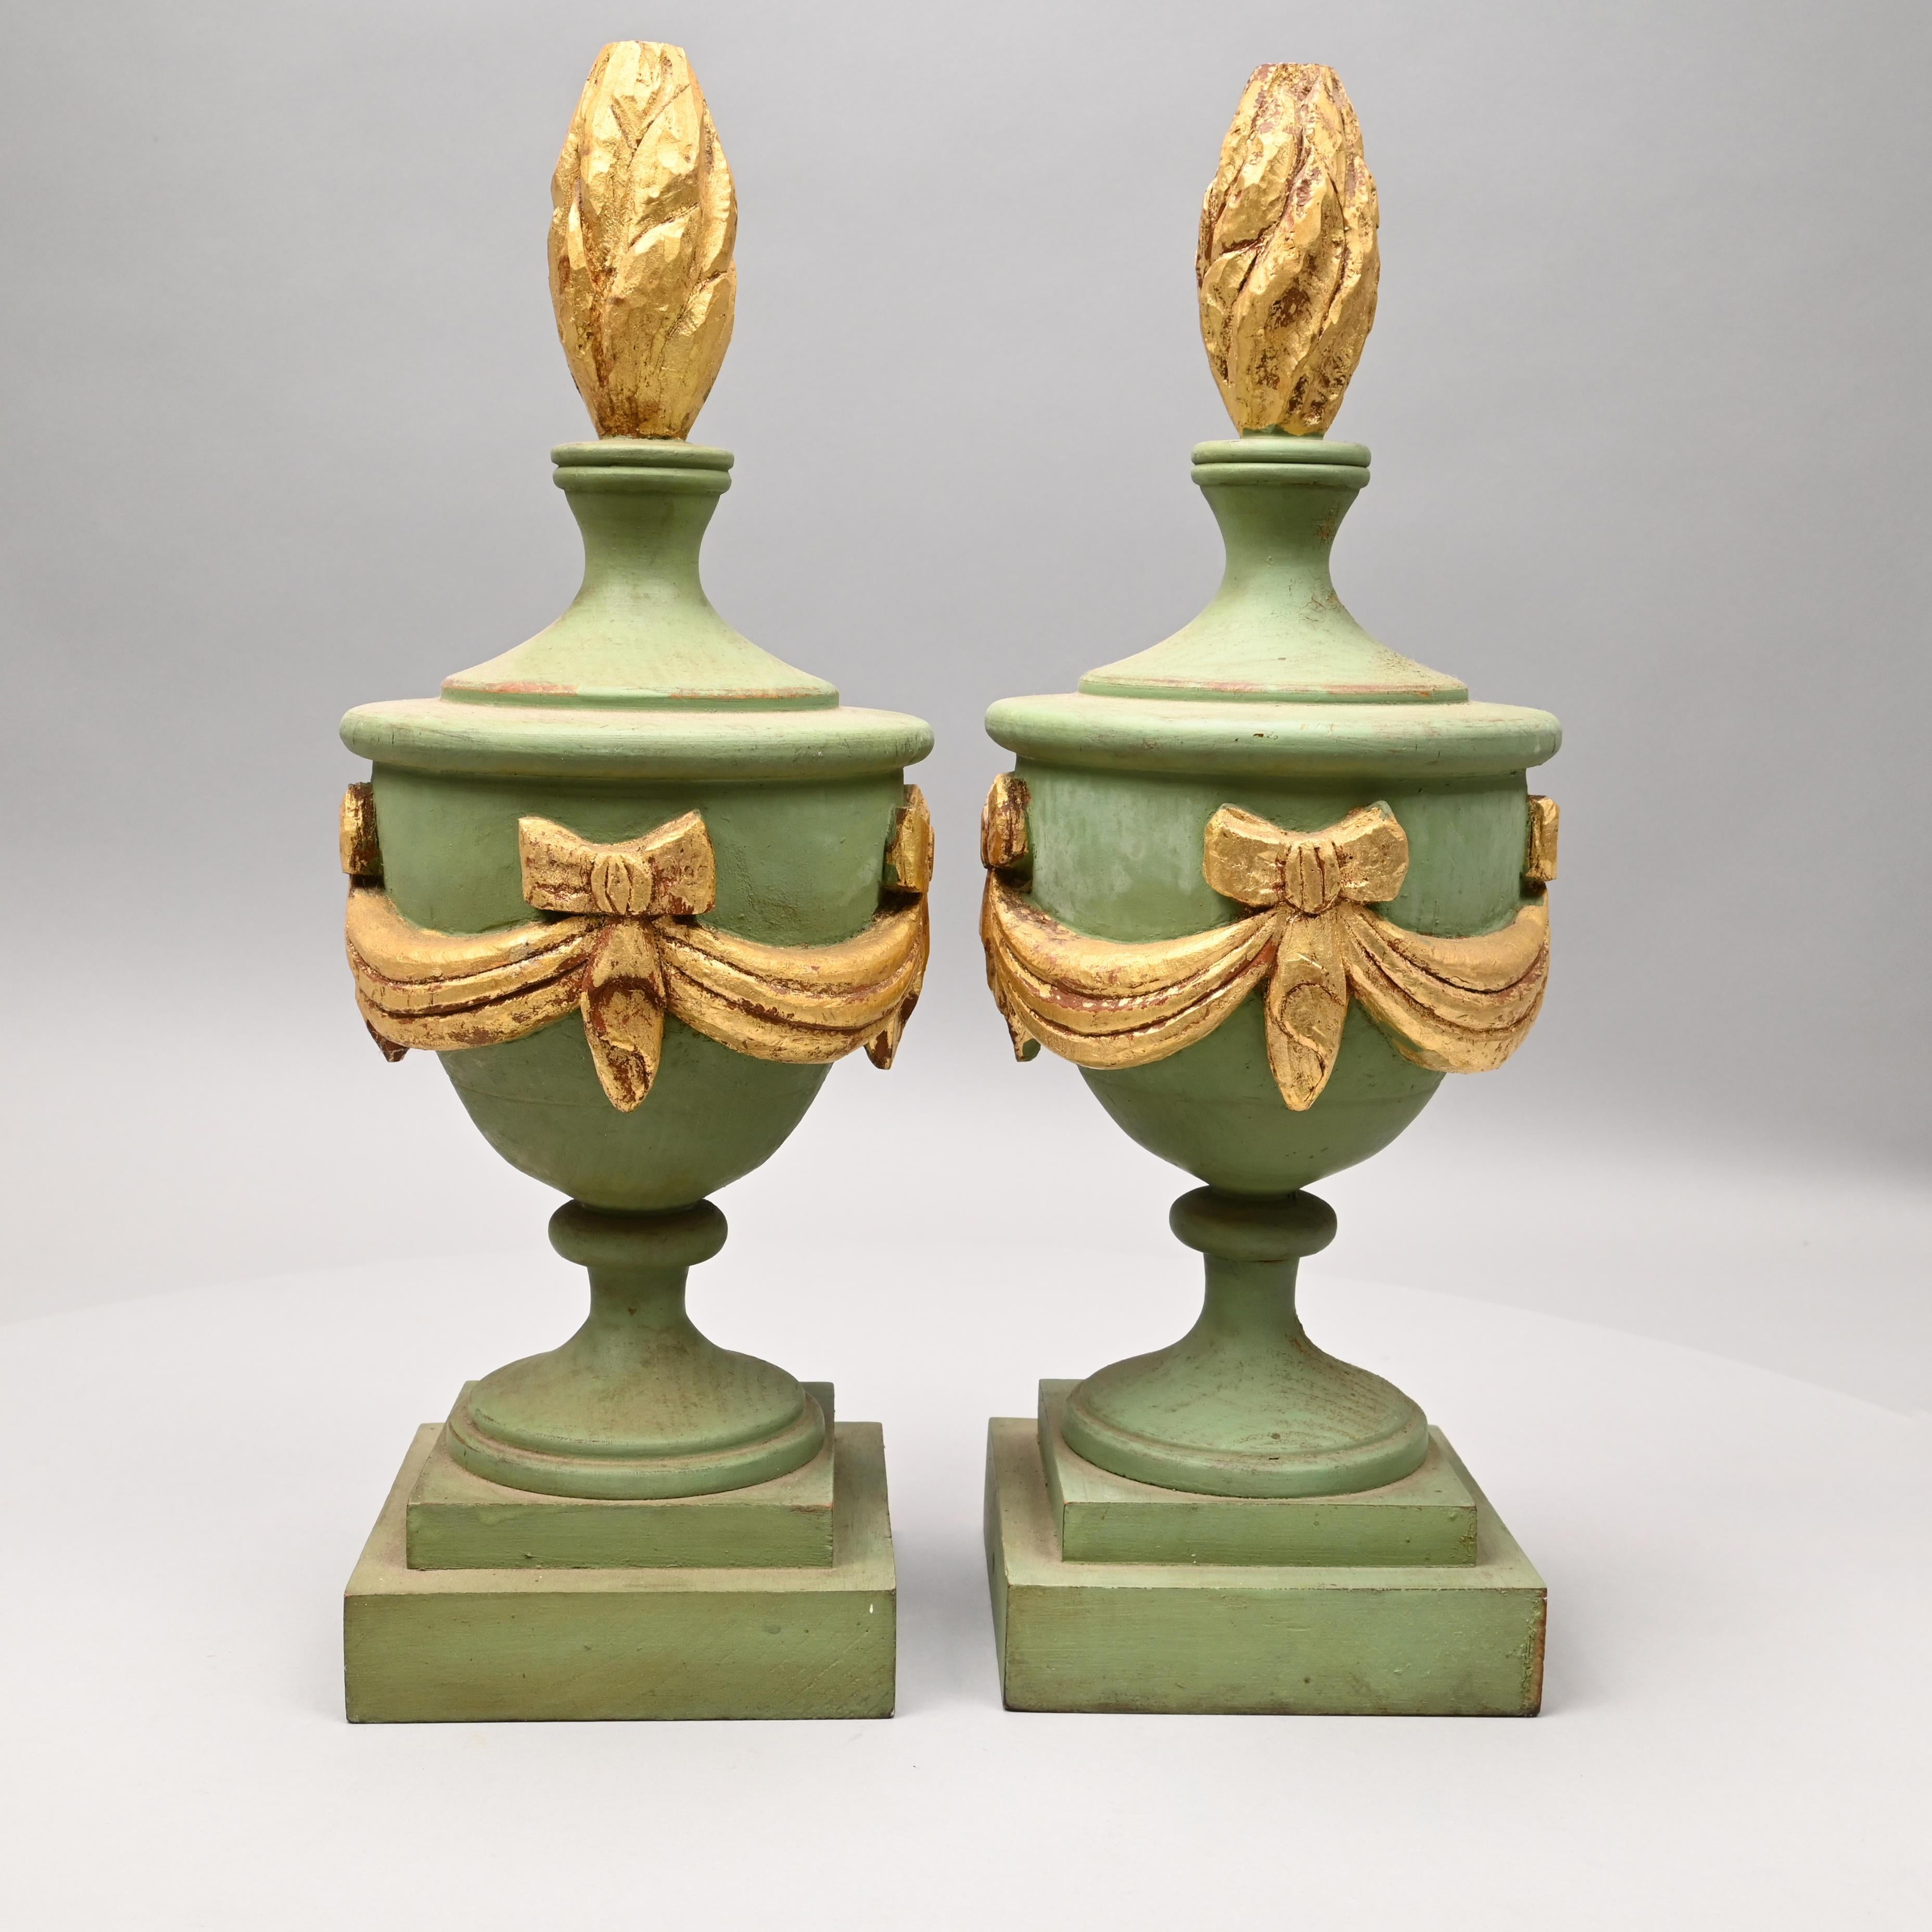 Neoclassical Revival Decorative Pair of Wooden Light Green and Gold Painted Architectural Finials For Sale